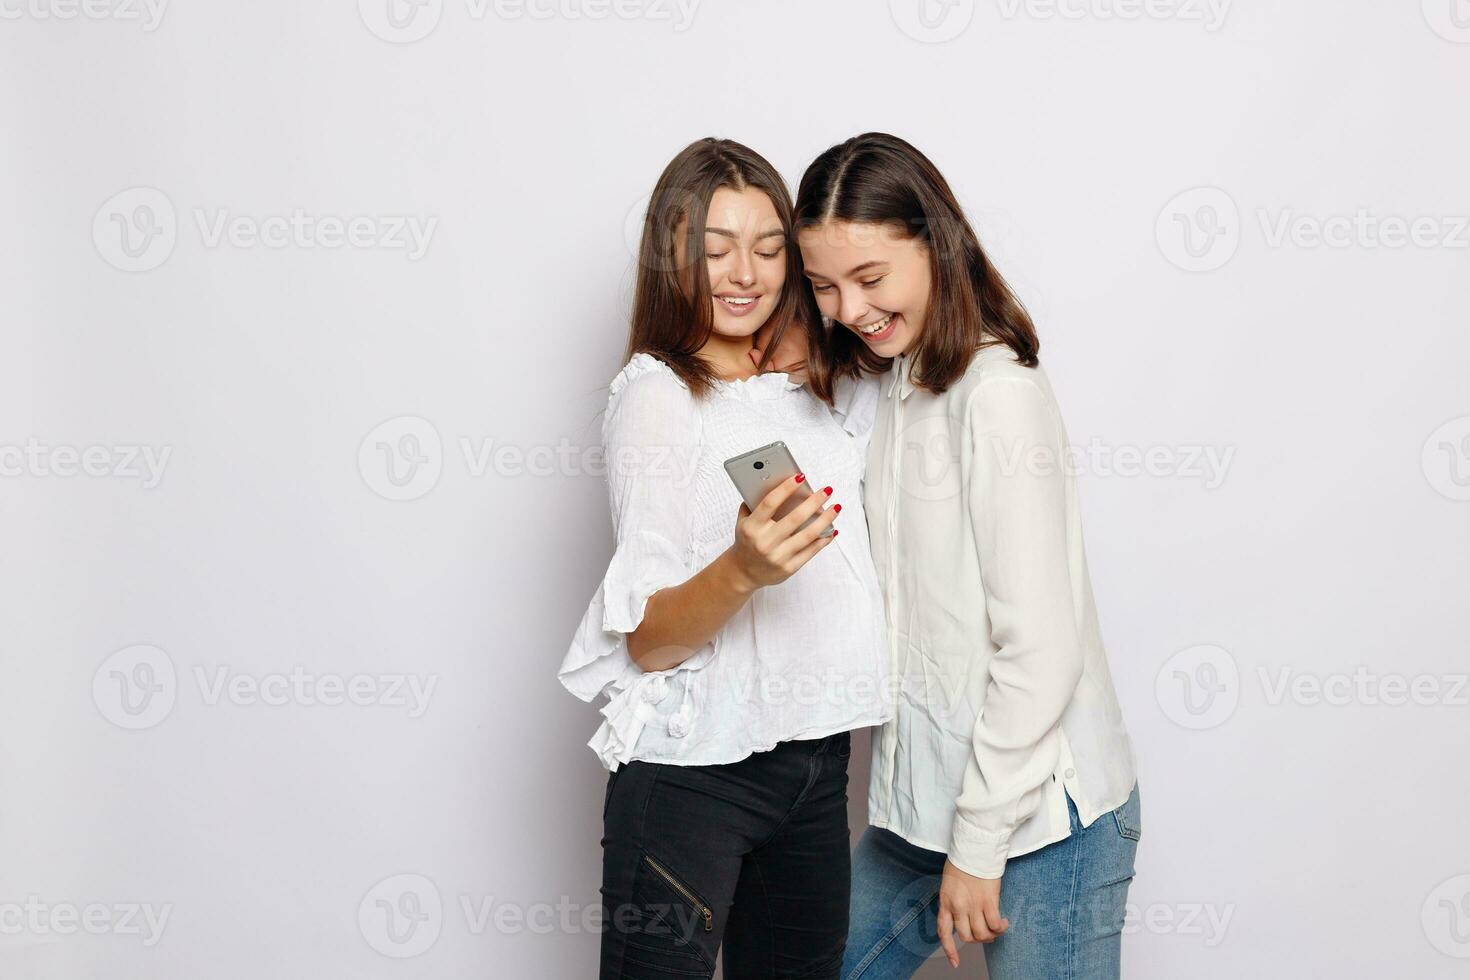 Happy smiling young woman showing photos on mobile phone